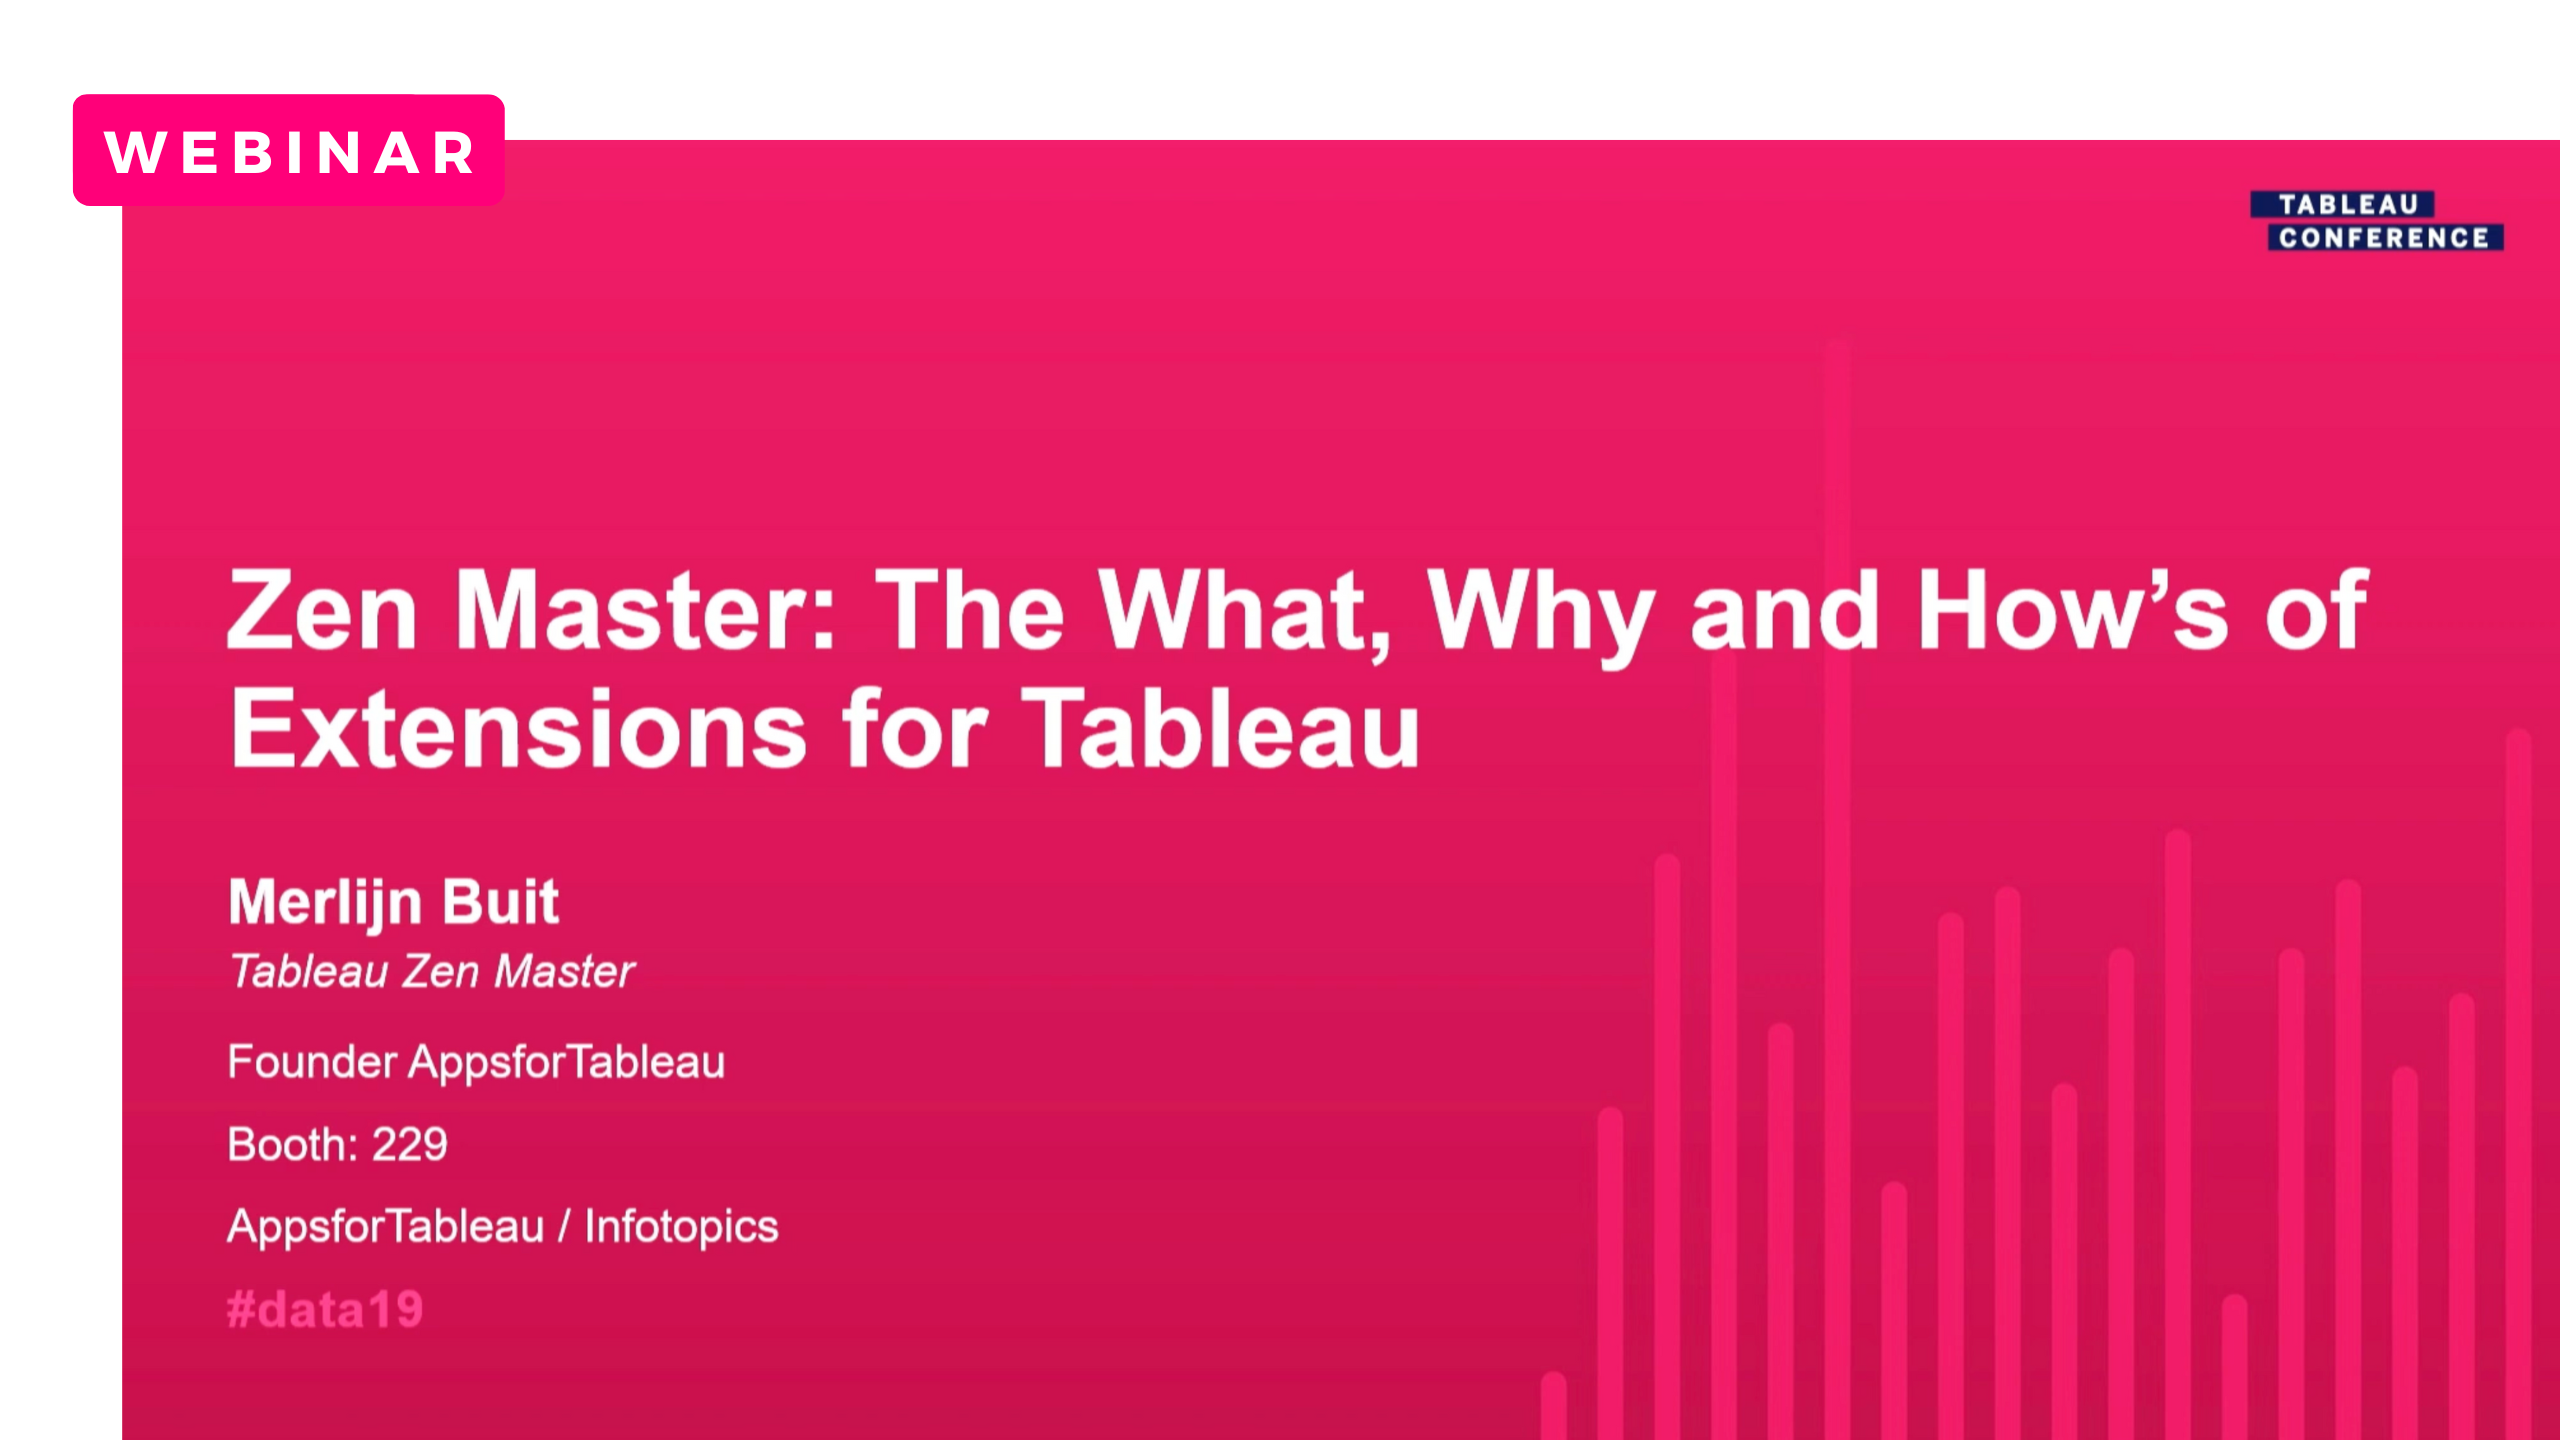 The what, why and how’s of extensions for tableau